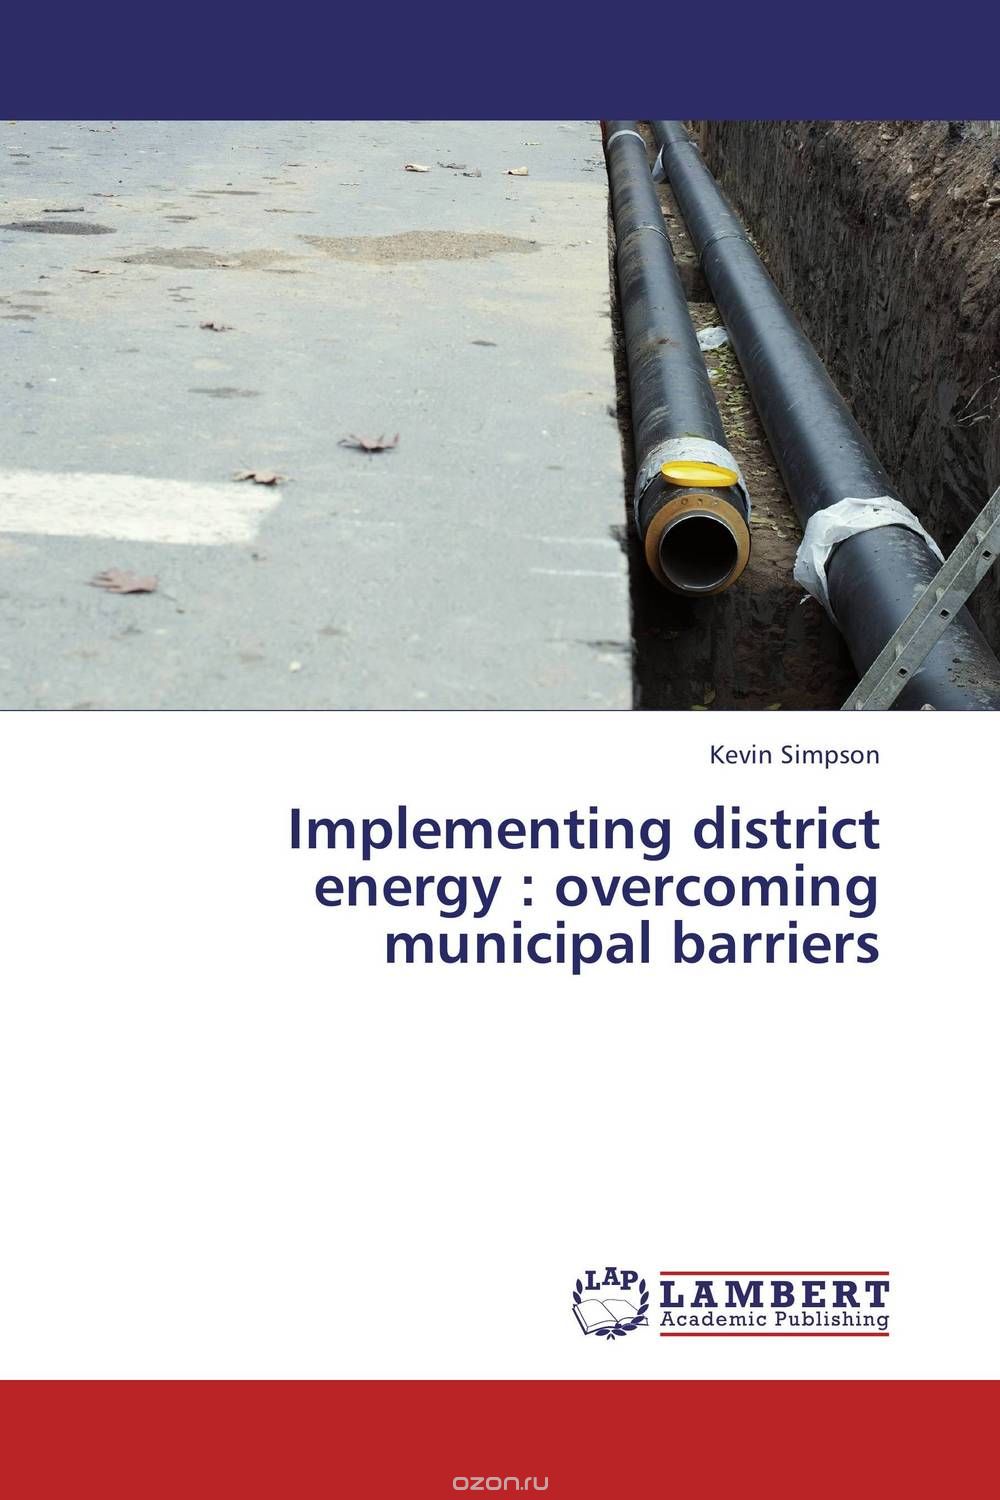 Implementing district energy : overcoming municipal barriers